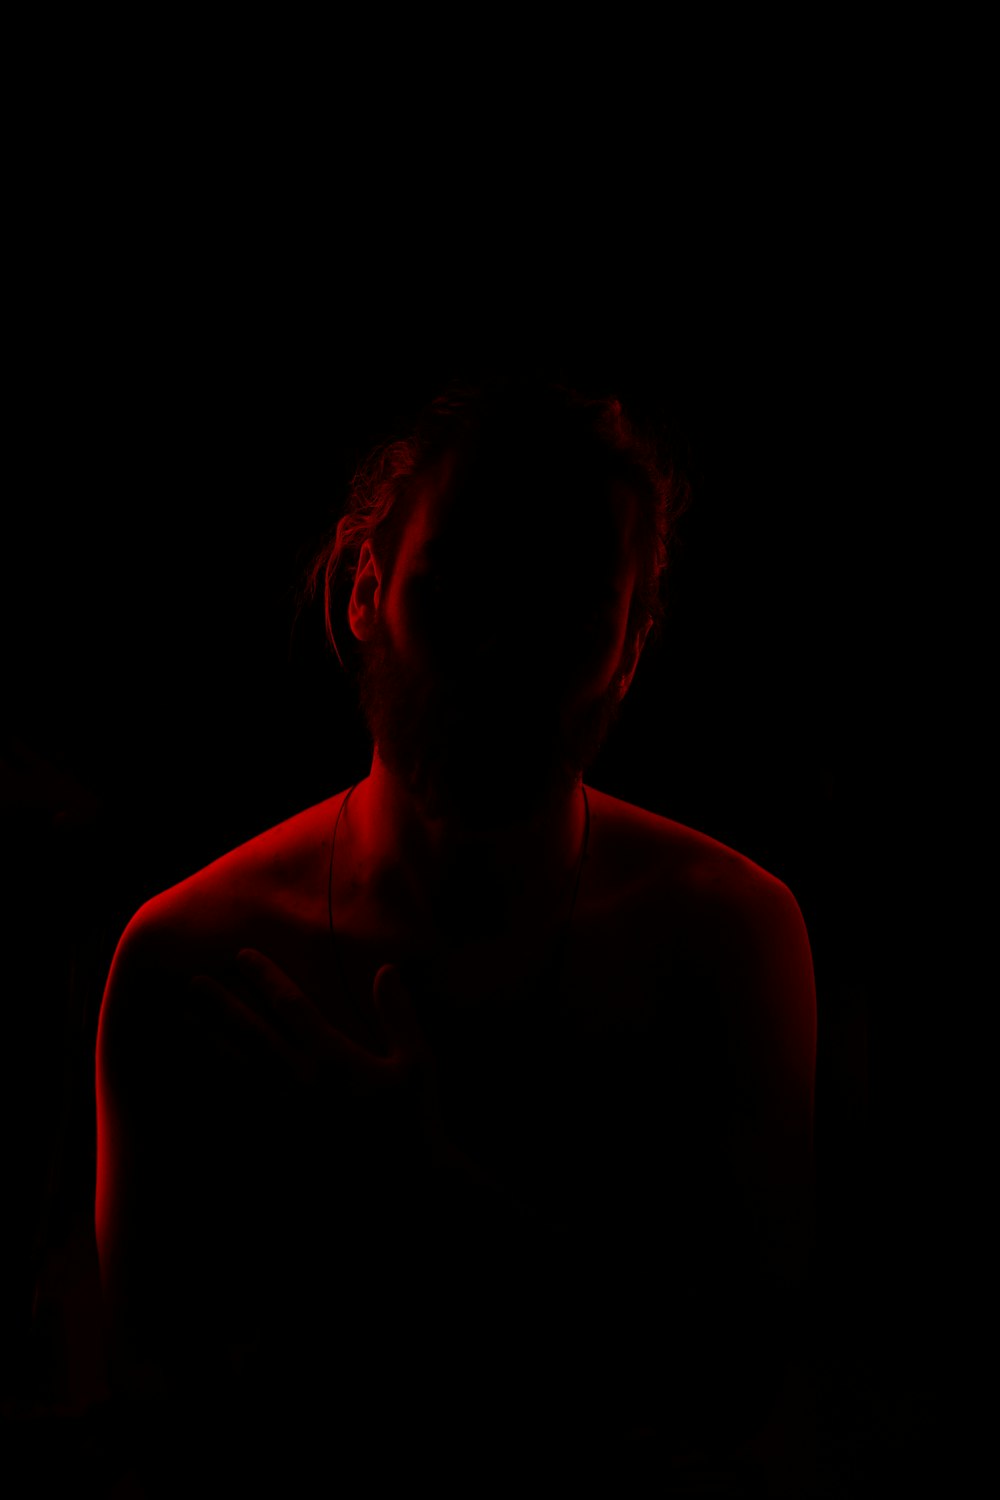 750+ Alone In The Dark Pictures | Download Free Images on Unsplash